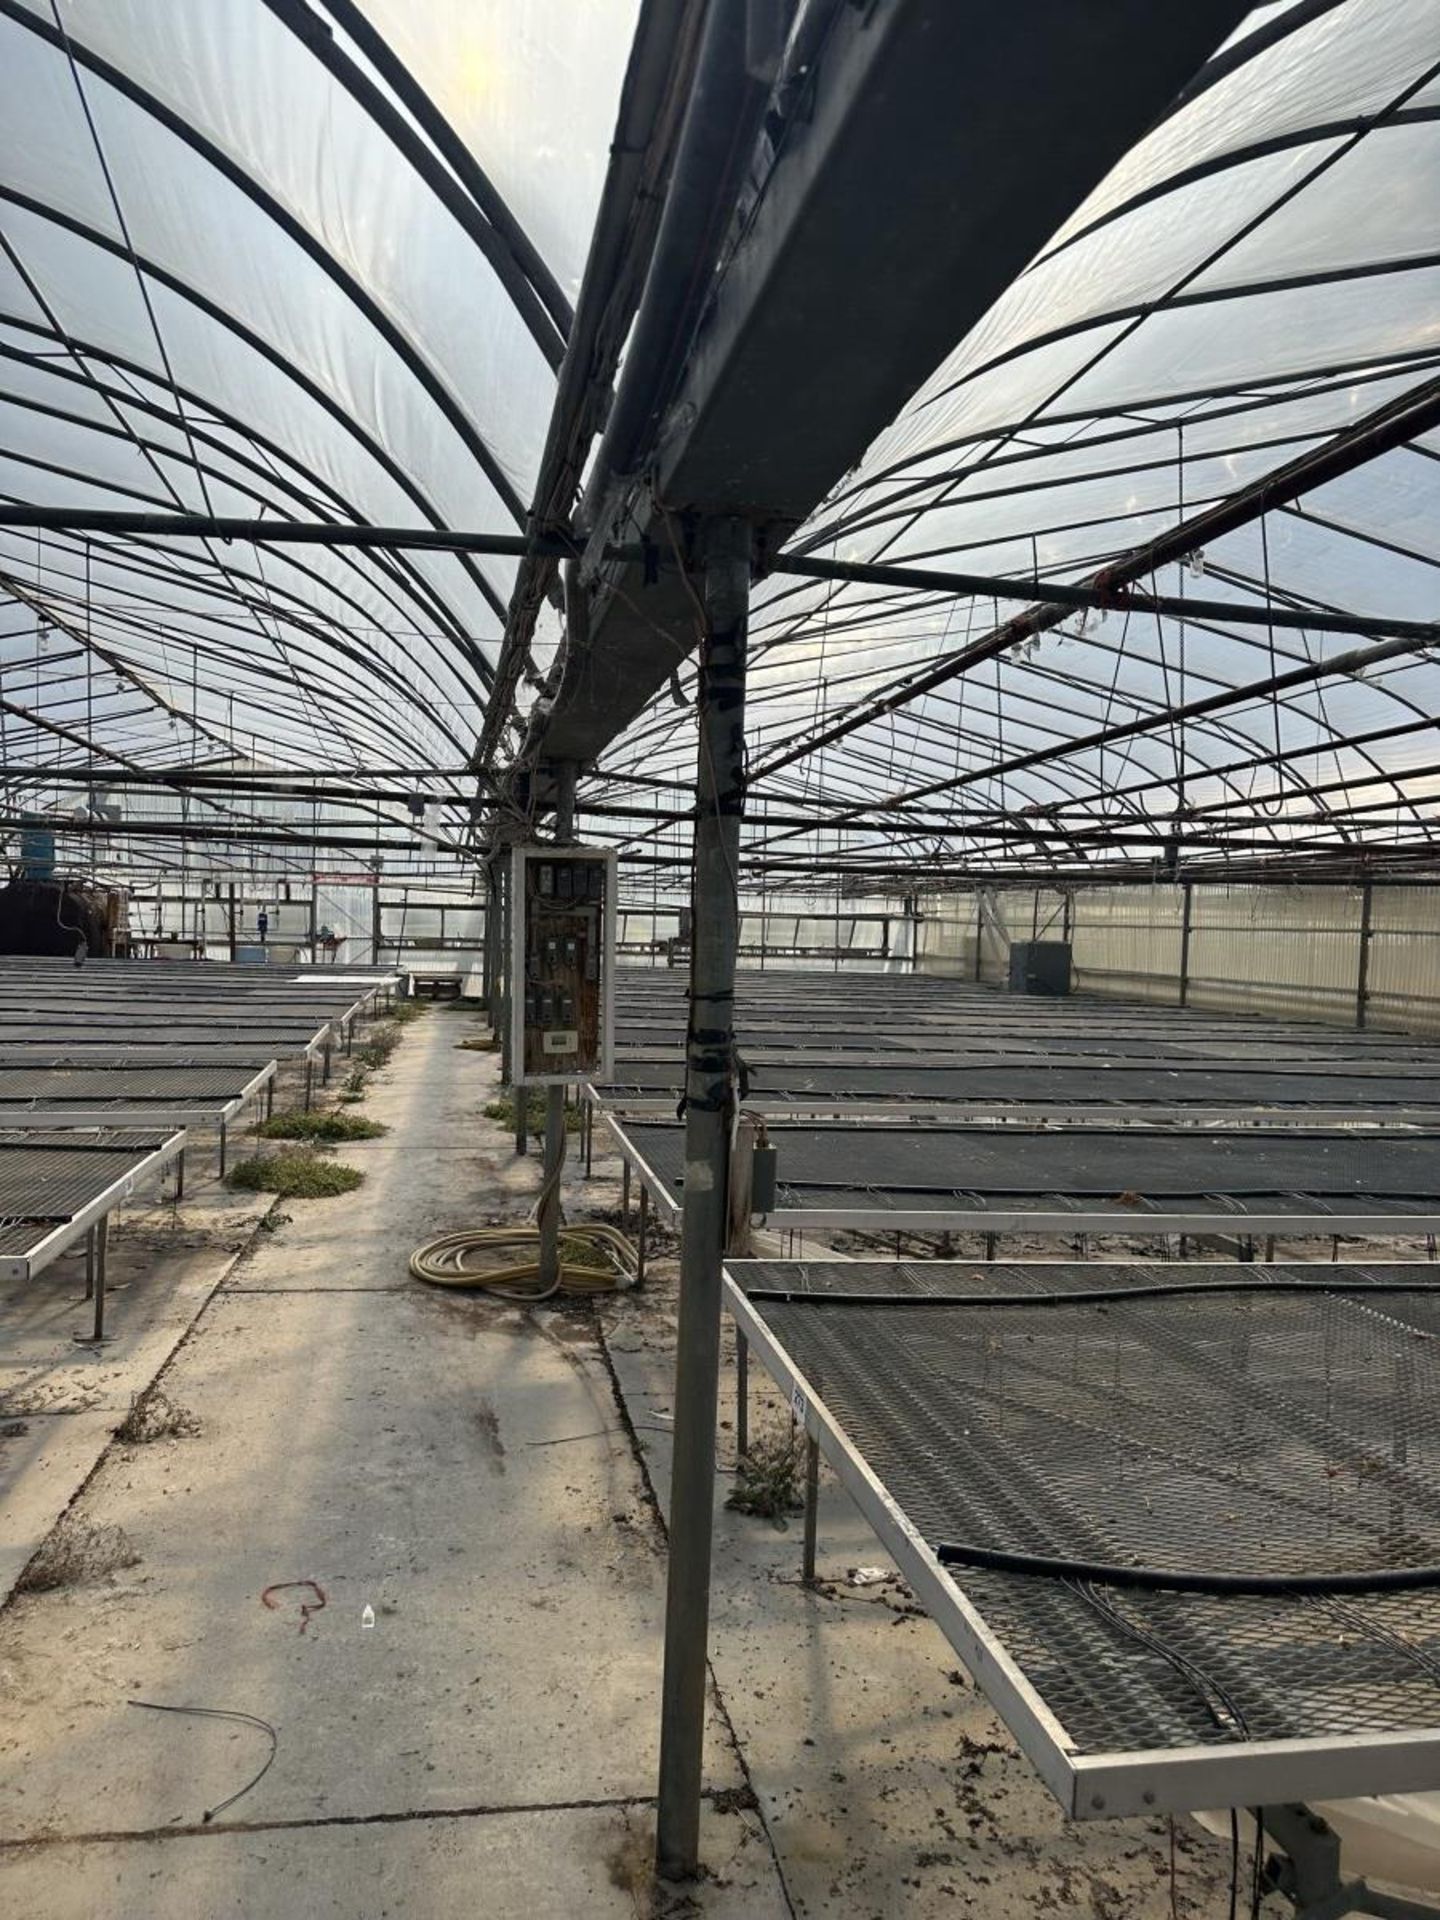 WESTBROOK GUTTER CONNECT 2-BAY GREENHOUSE 60FT X 144FT X 96” H & 2-BAY 60FT X 72 FT X 96”, INCLUDING - Image 56 of 95